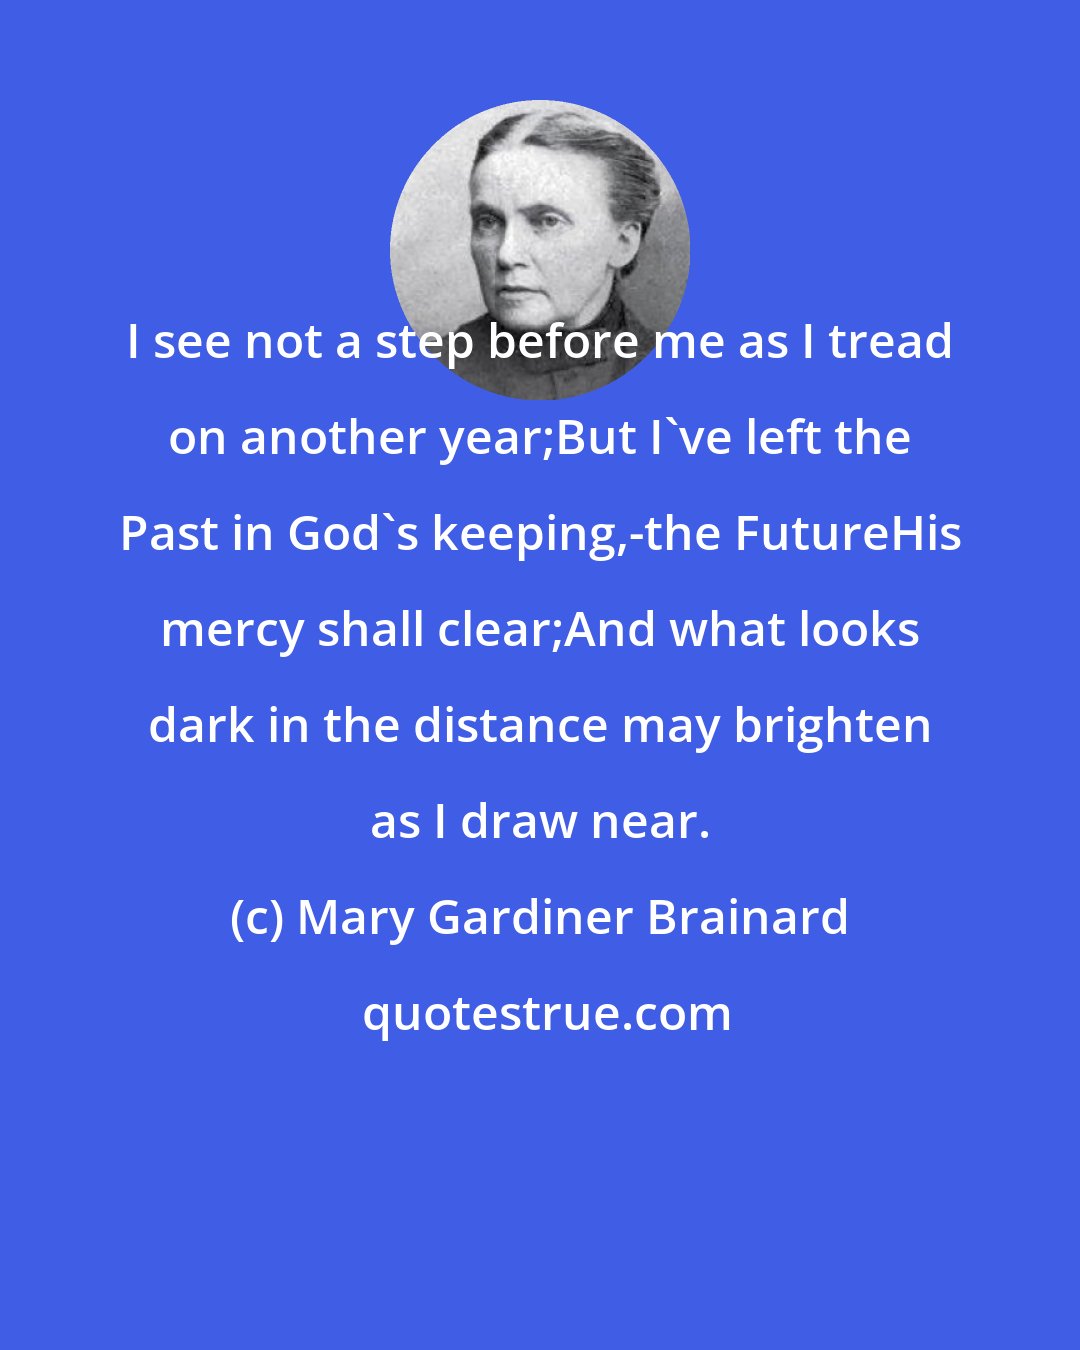 Mary Gardiner Brainard: I see not a step before me as I tread on another year;But I've left the Past in God's keeping,-the FutureHis mercy shall clear;And what looks dark in the distance may brighten as I draw near.